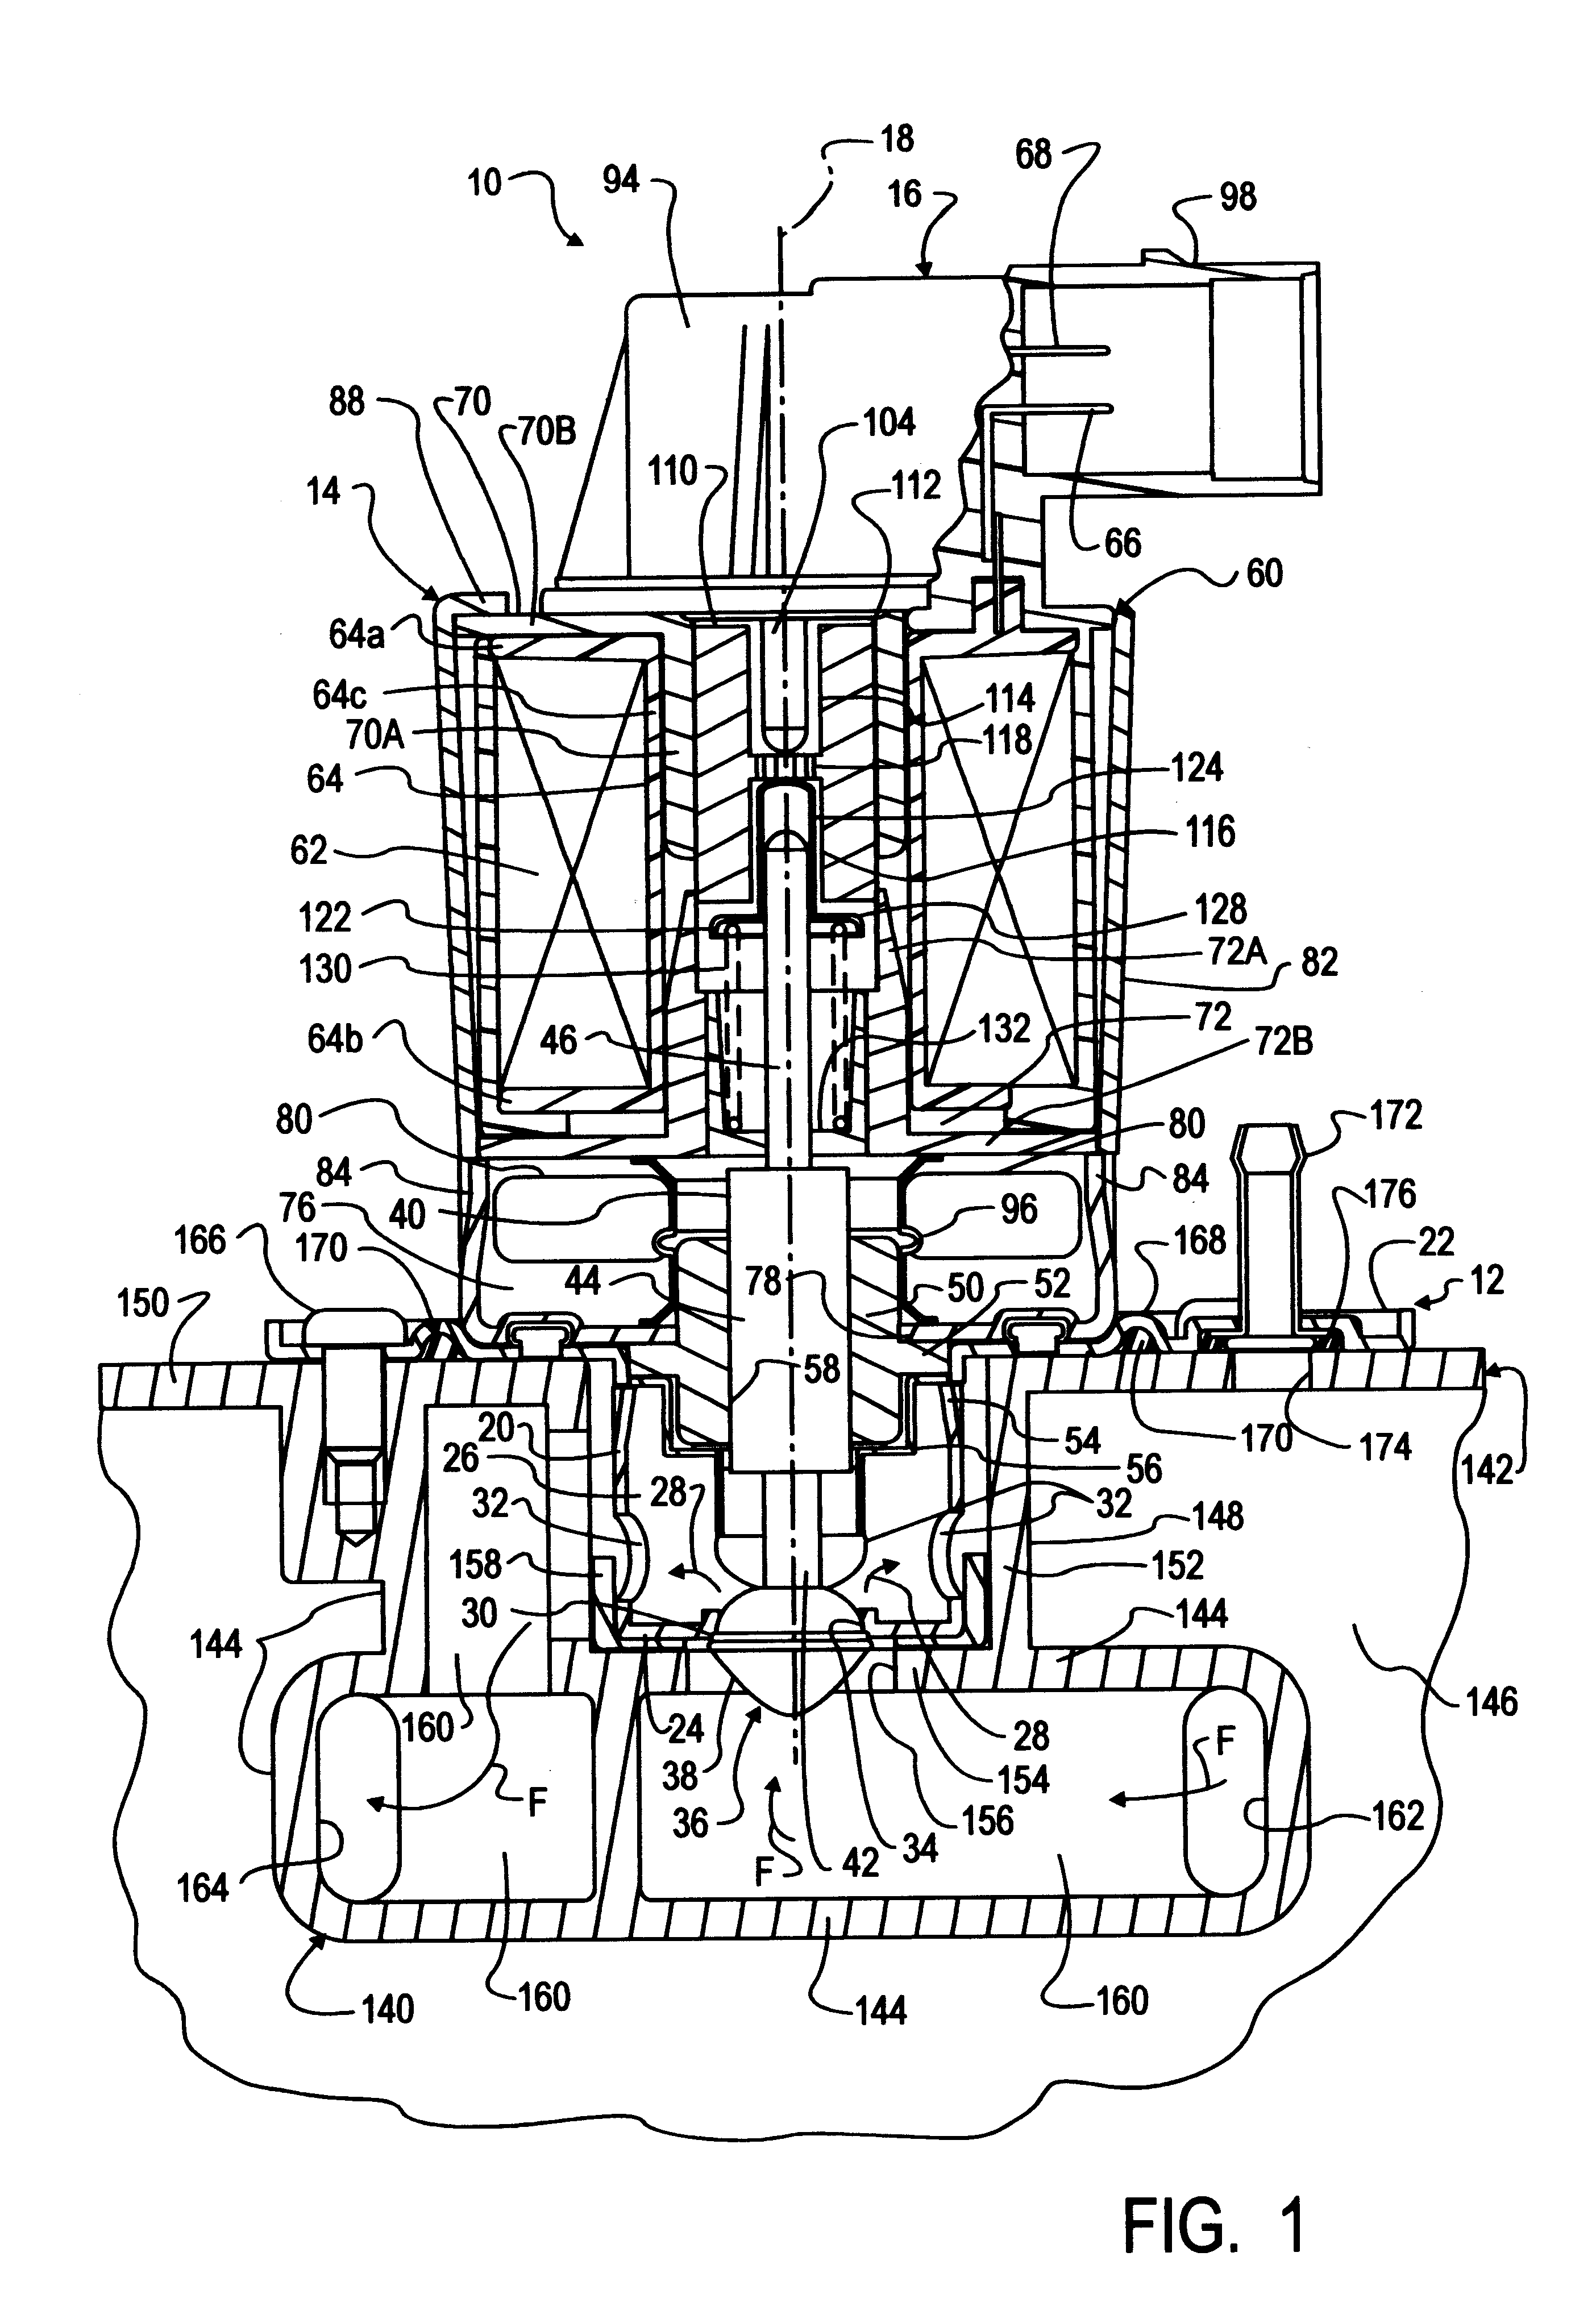 Engine mounting of an exhaust gas recirculation valve